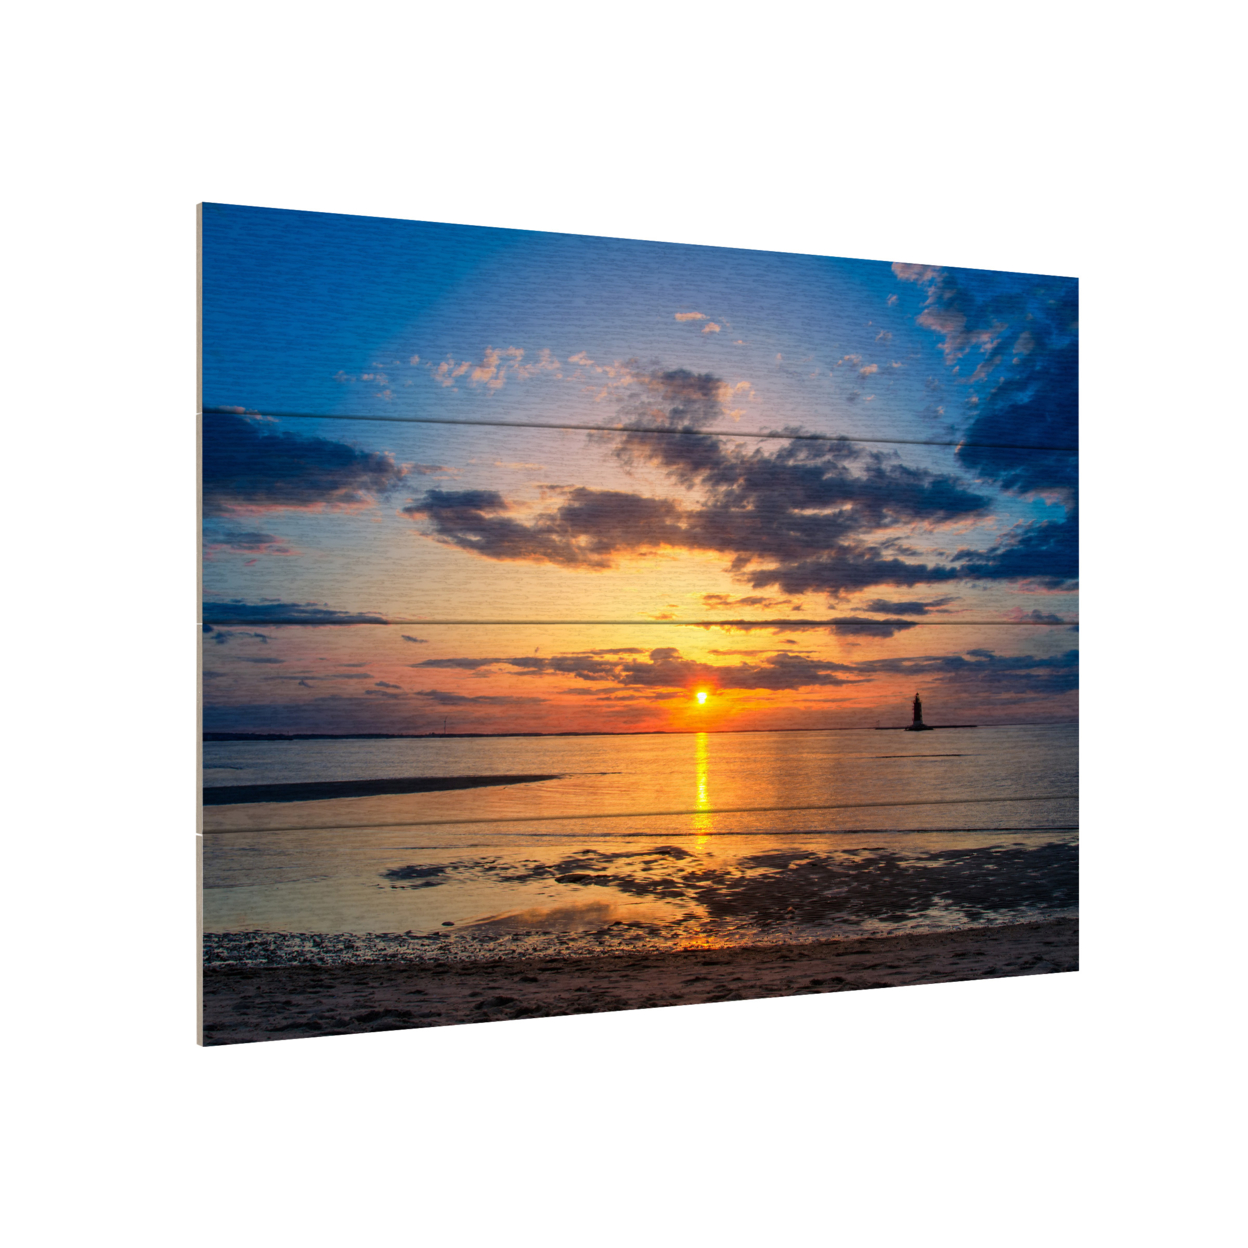 Wall Art 12 X 16 Inches Titled Sunset Breakwater Lighthouse Ready To Hang Printed On Wooden Planks